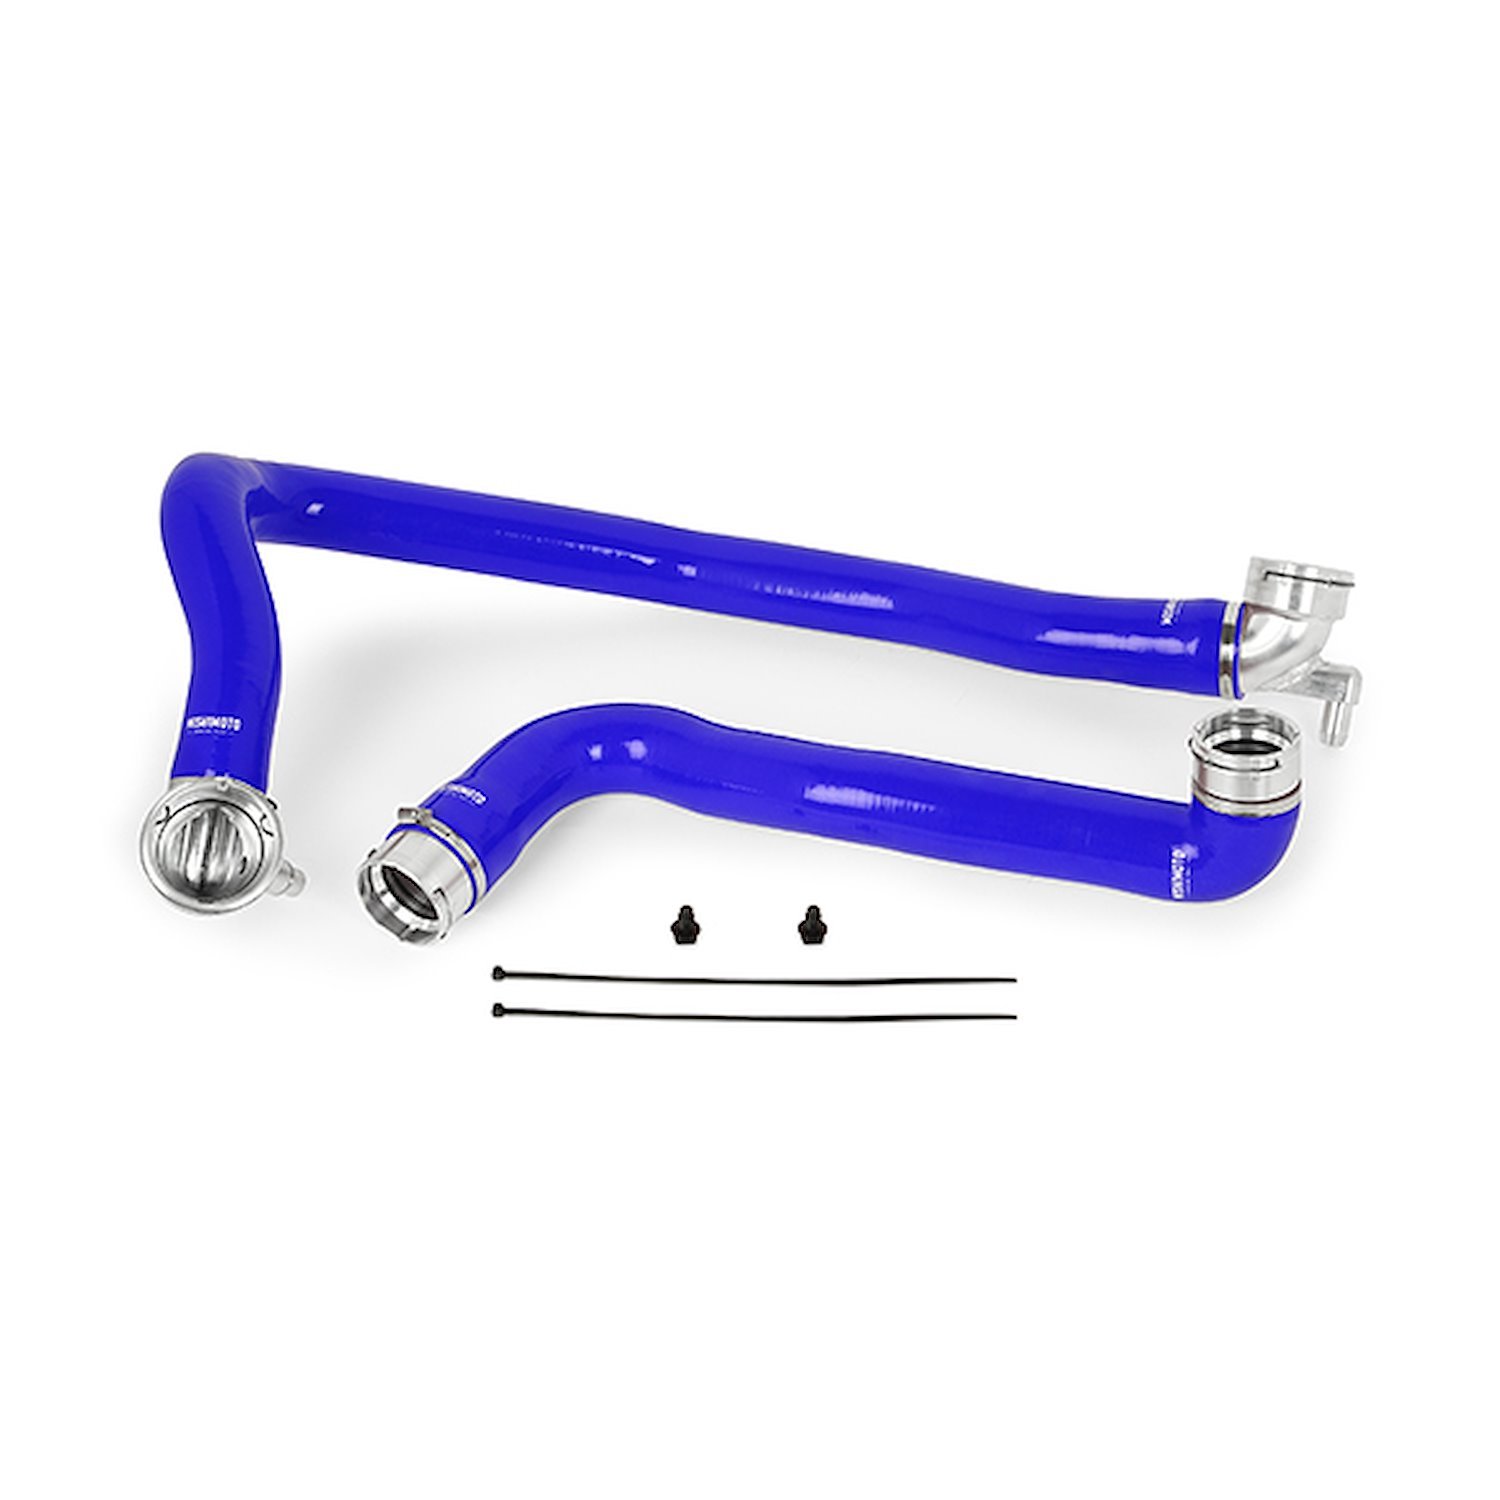 Silicone Radiator Hose Kit for 2011-2016 Ford 6.7L Powerstroke [Blue]